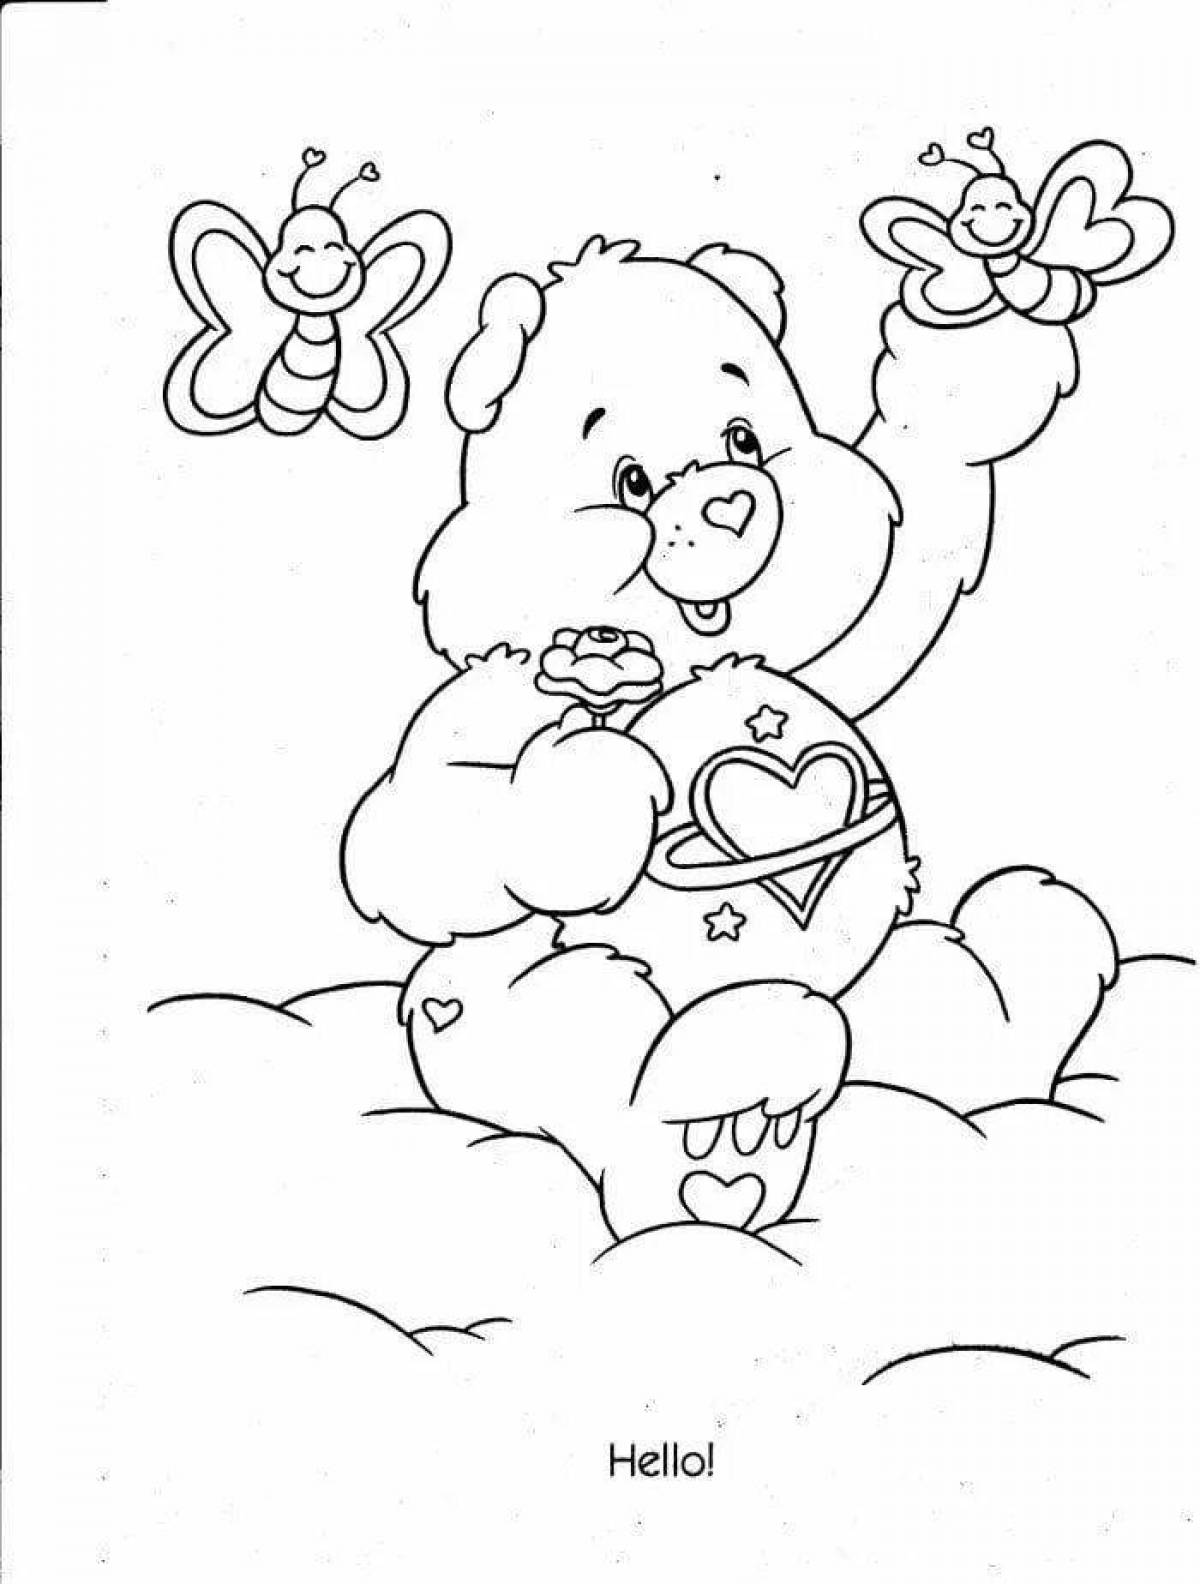 Snug care bears coloring page